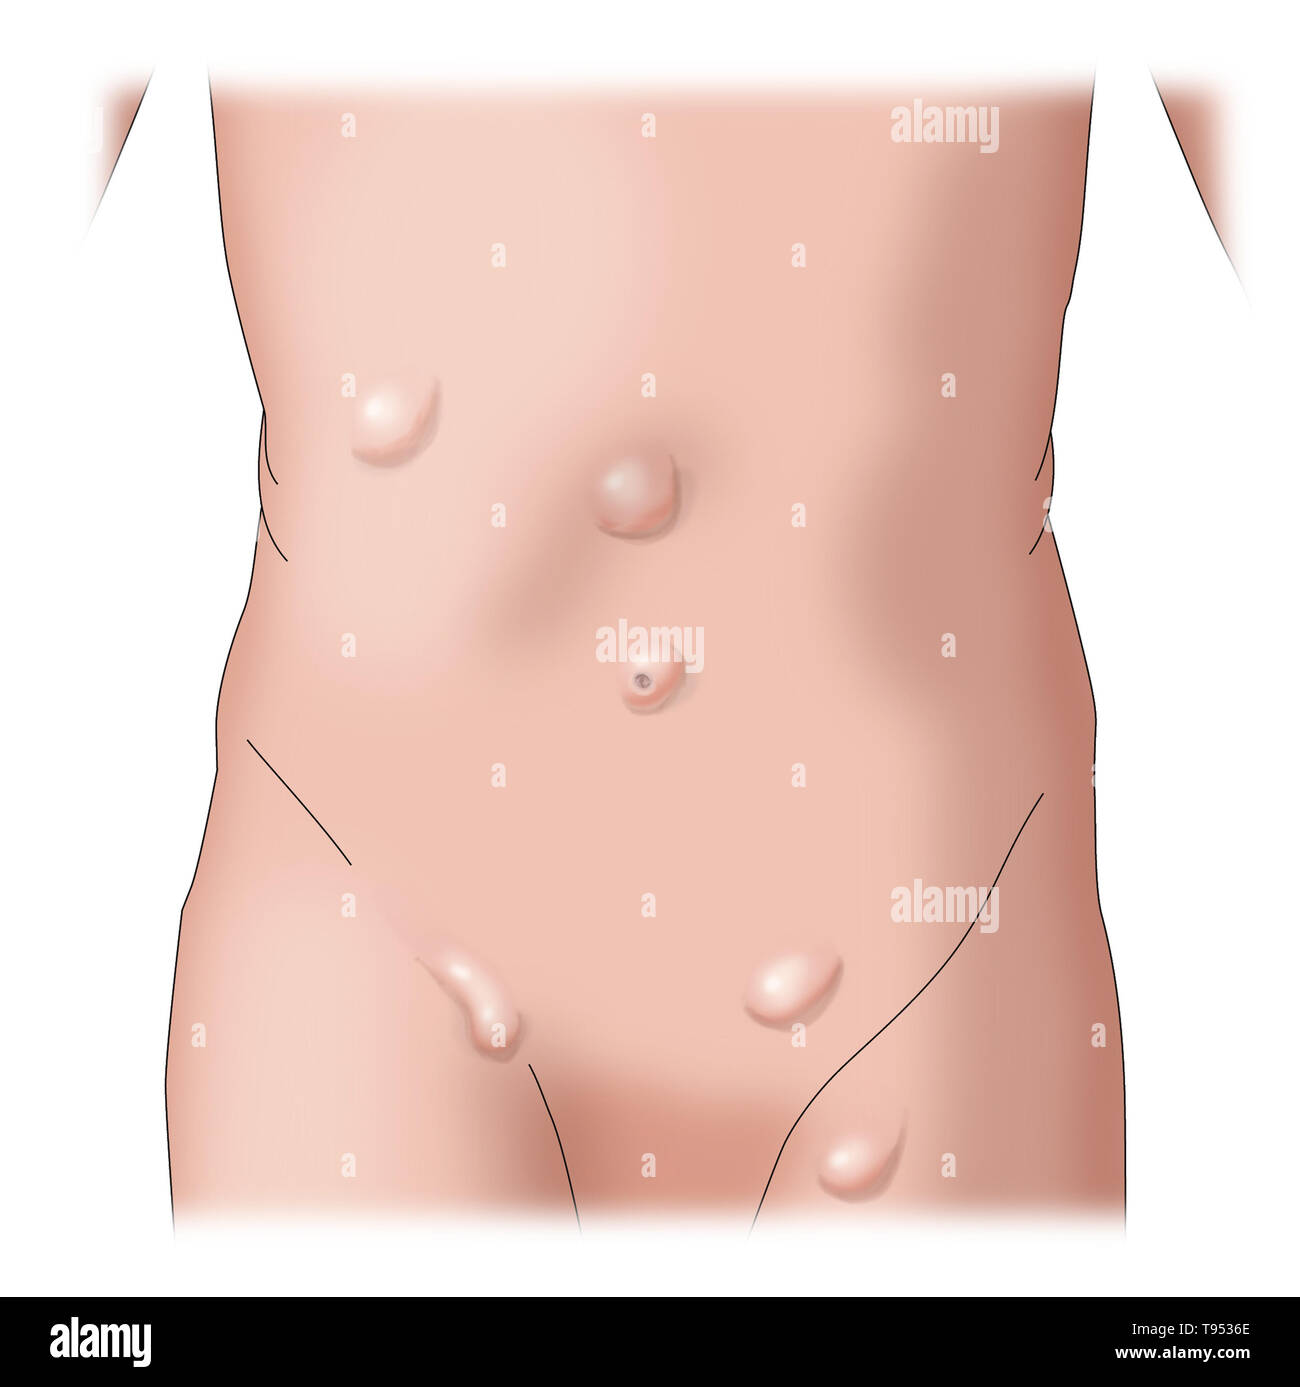 An illustration showing the various types of hernias. Stock Photo